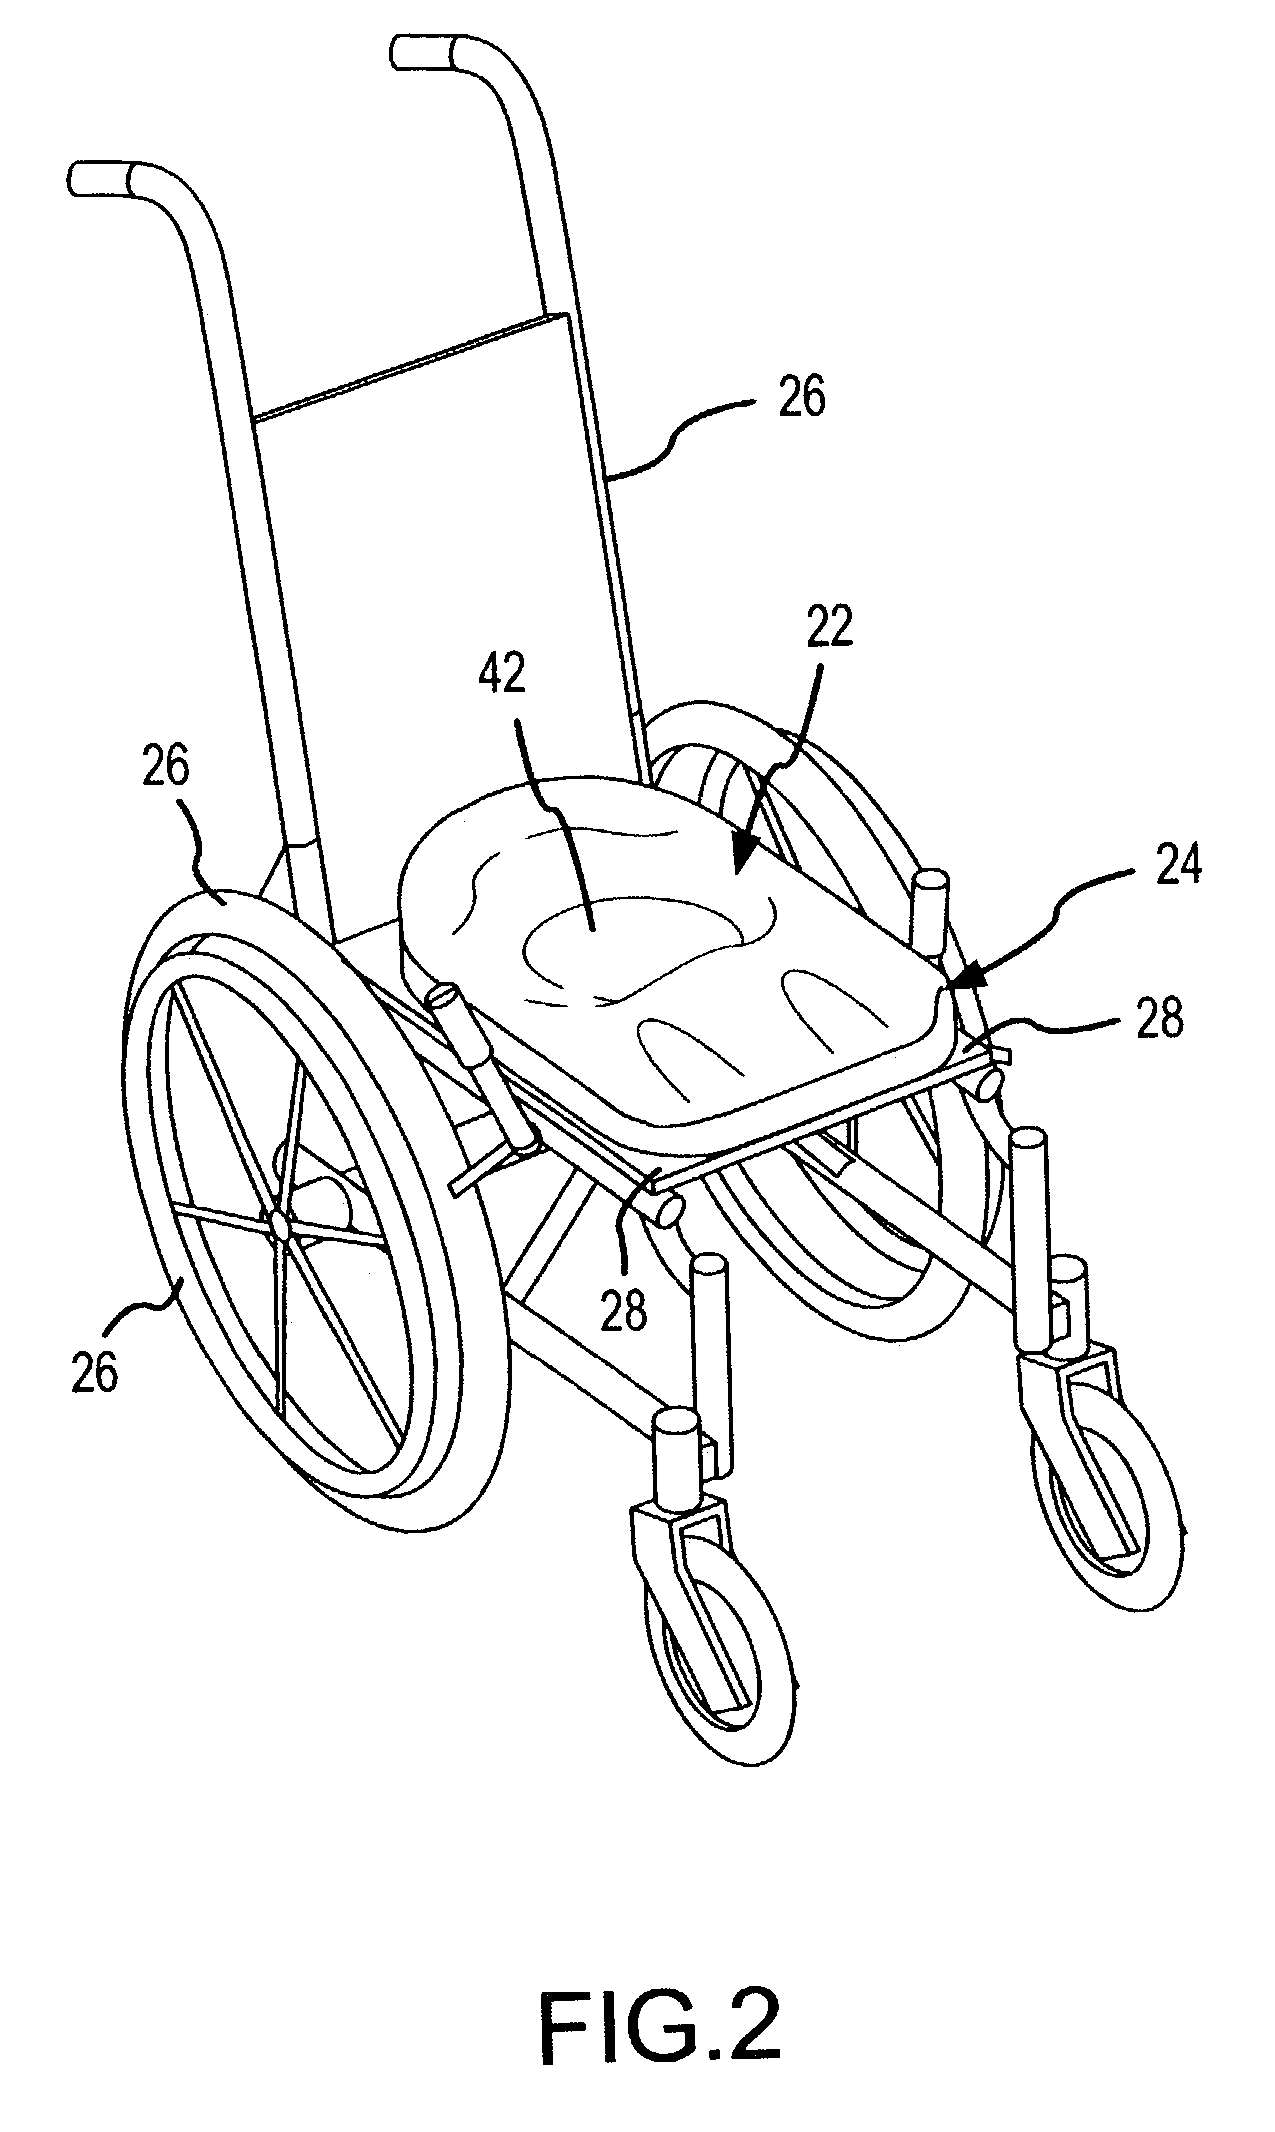 Apparatus and method for evaluating clearance from a contoured seat cushion